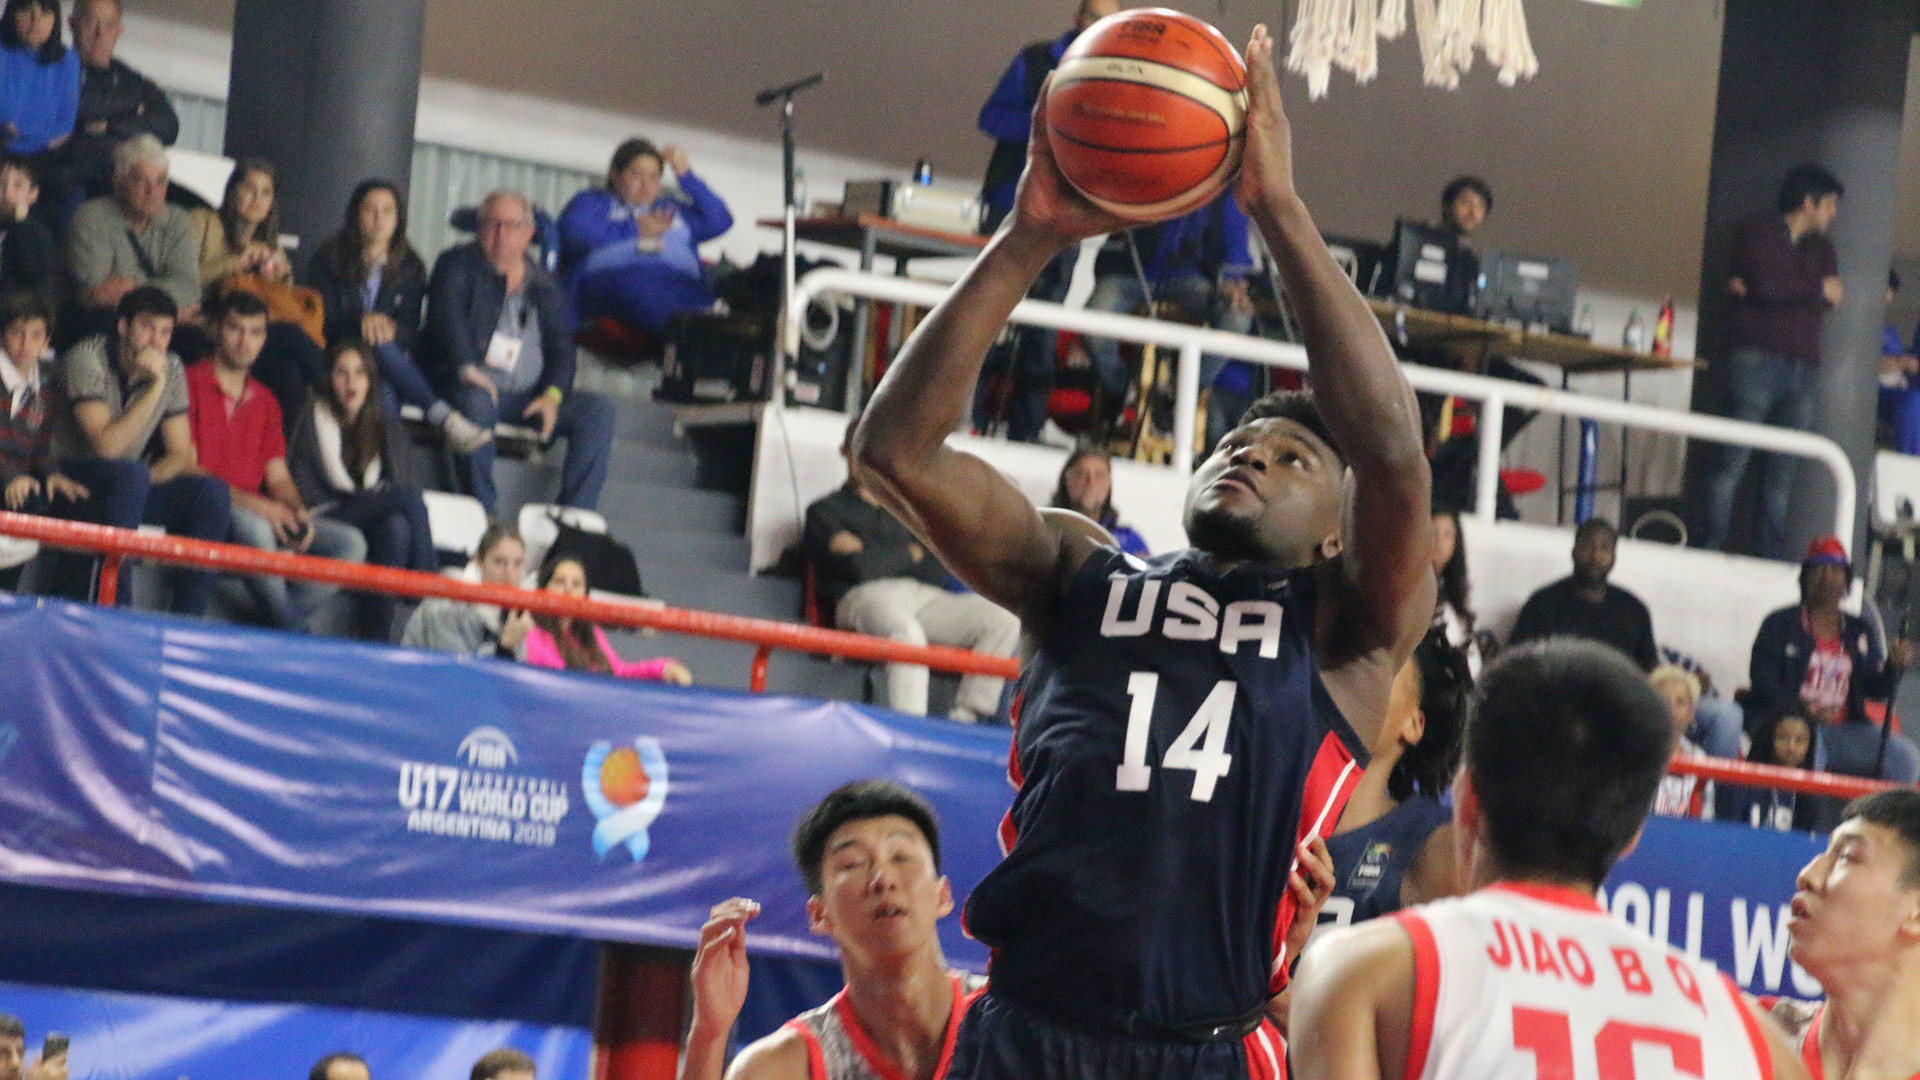 The United States thrashed China on the opening day of the FIBA Under-17 World Cup ©FIBA